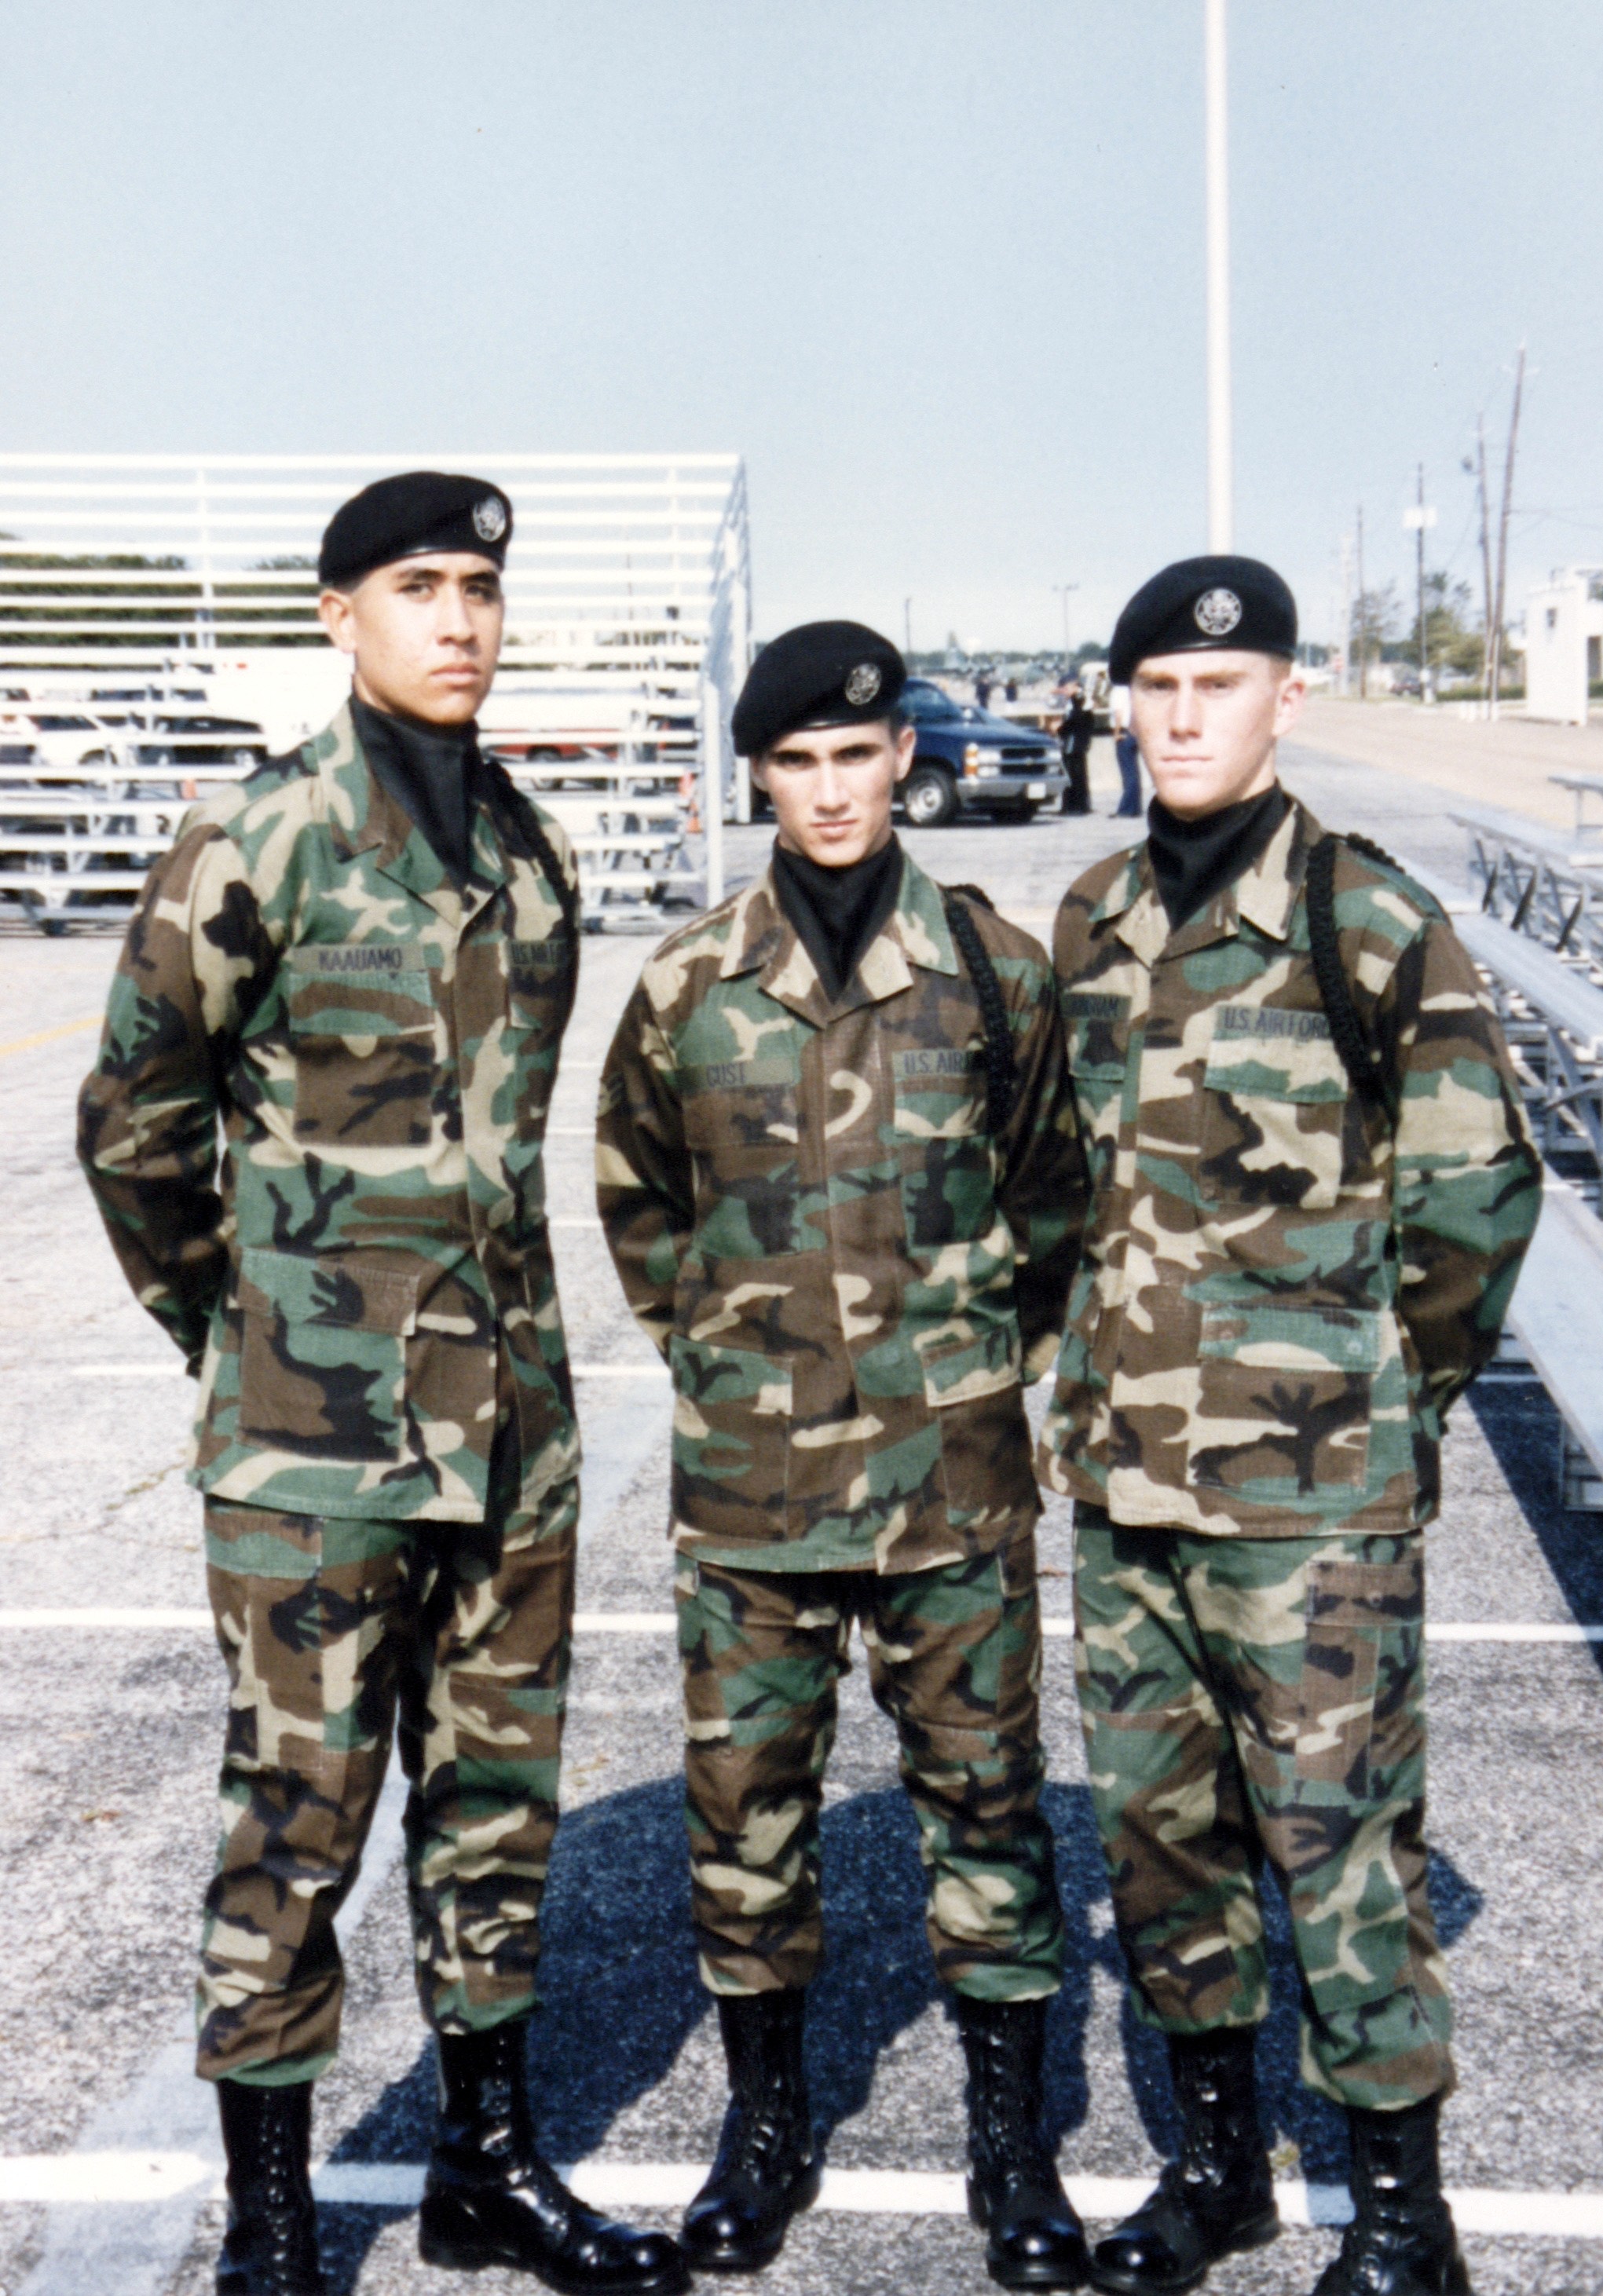 Jason standing between two members of his USAF drill team squad